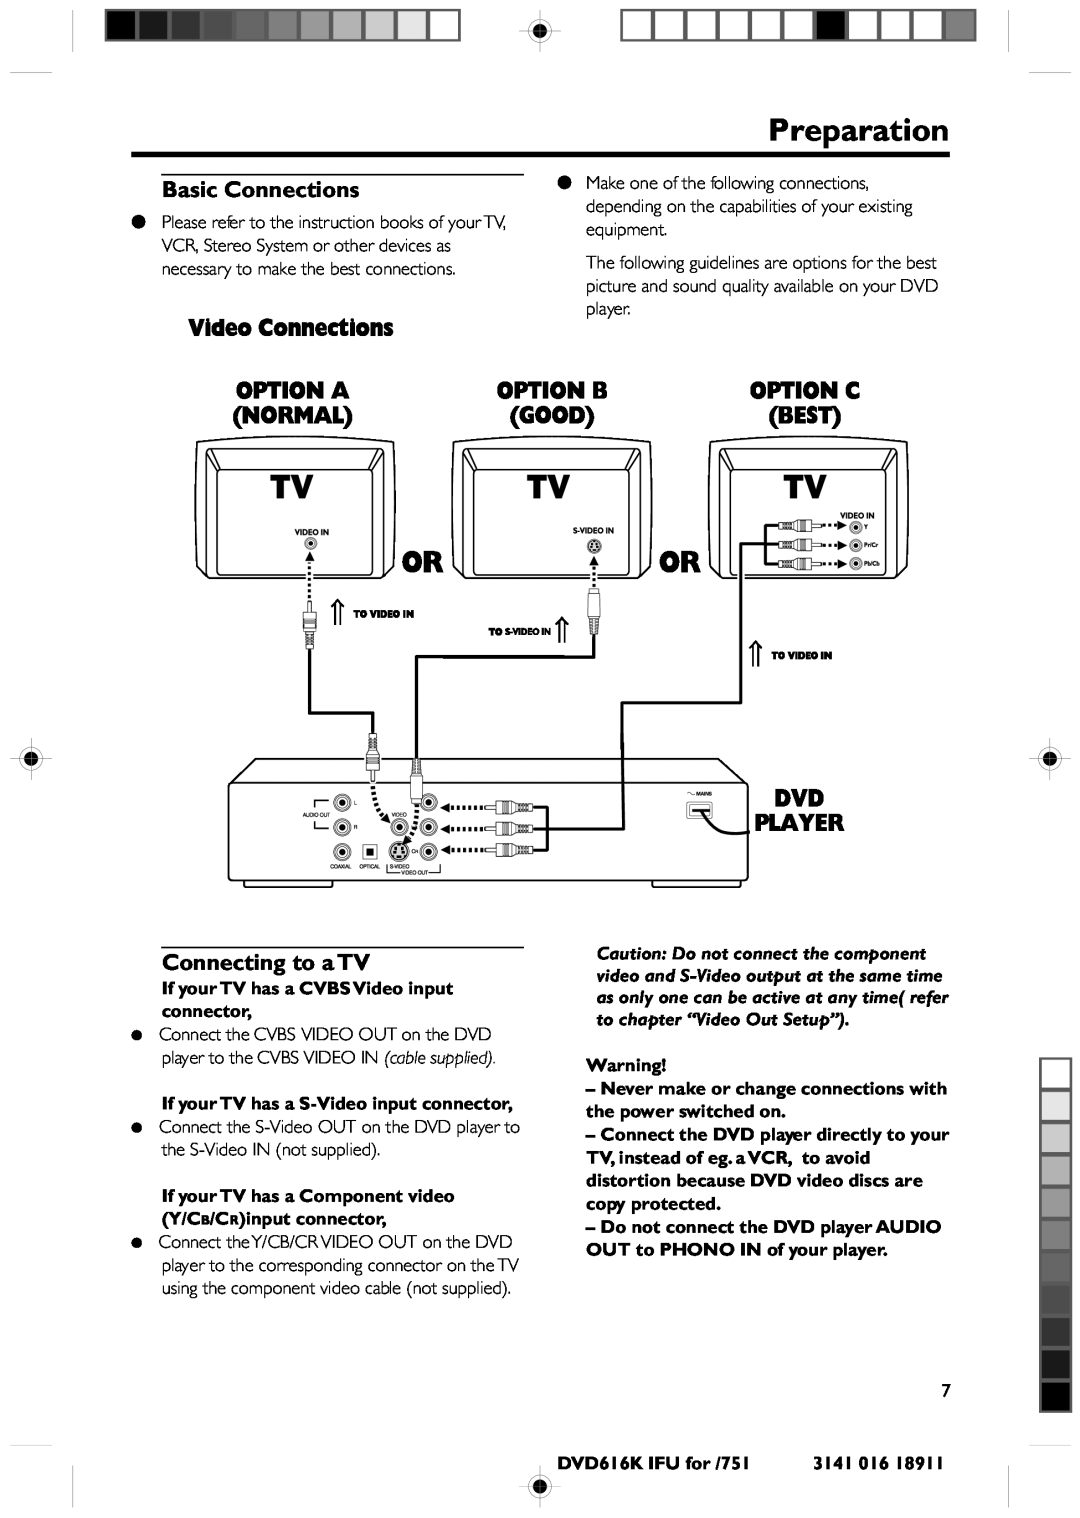 Philips DVD616K manual Preparation, Basic Connections, Connecting to a TV 